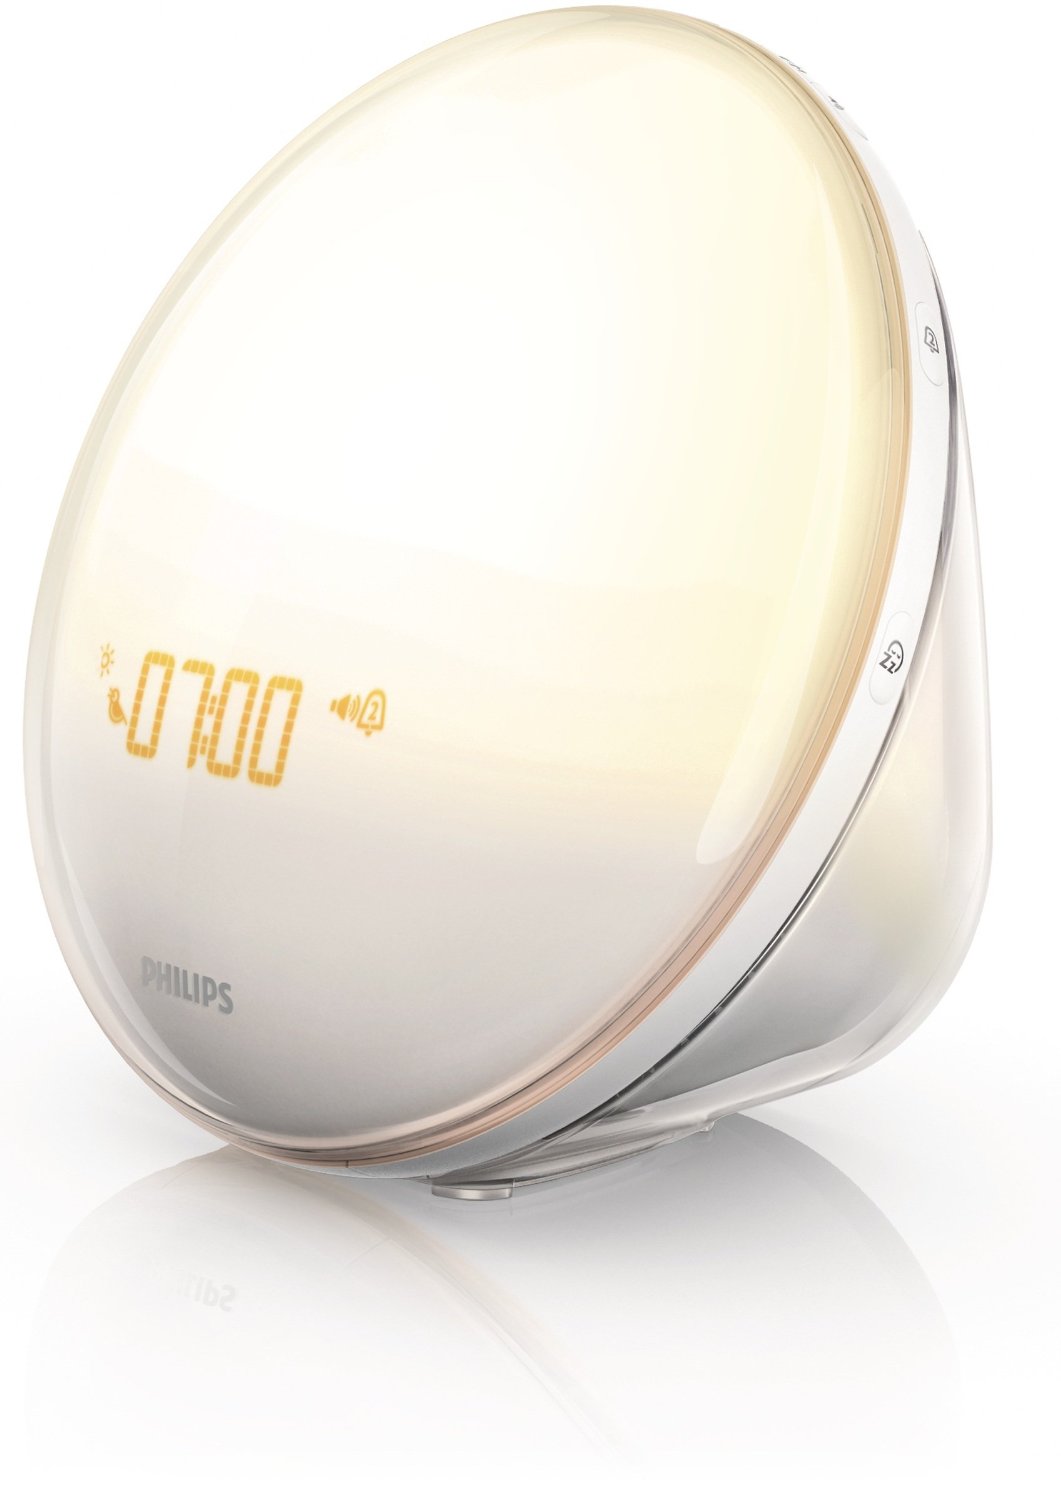 The Philips HF3520 Wake-Up Light With Colored Sunrise Simulation